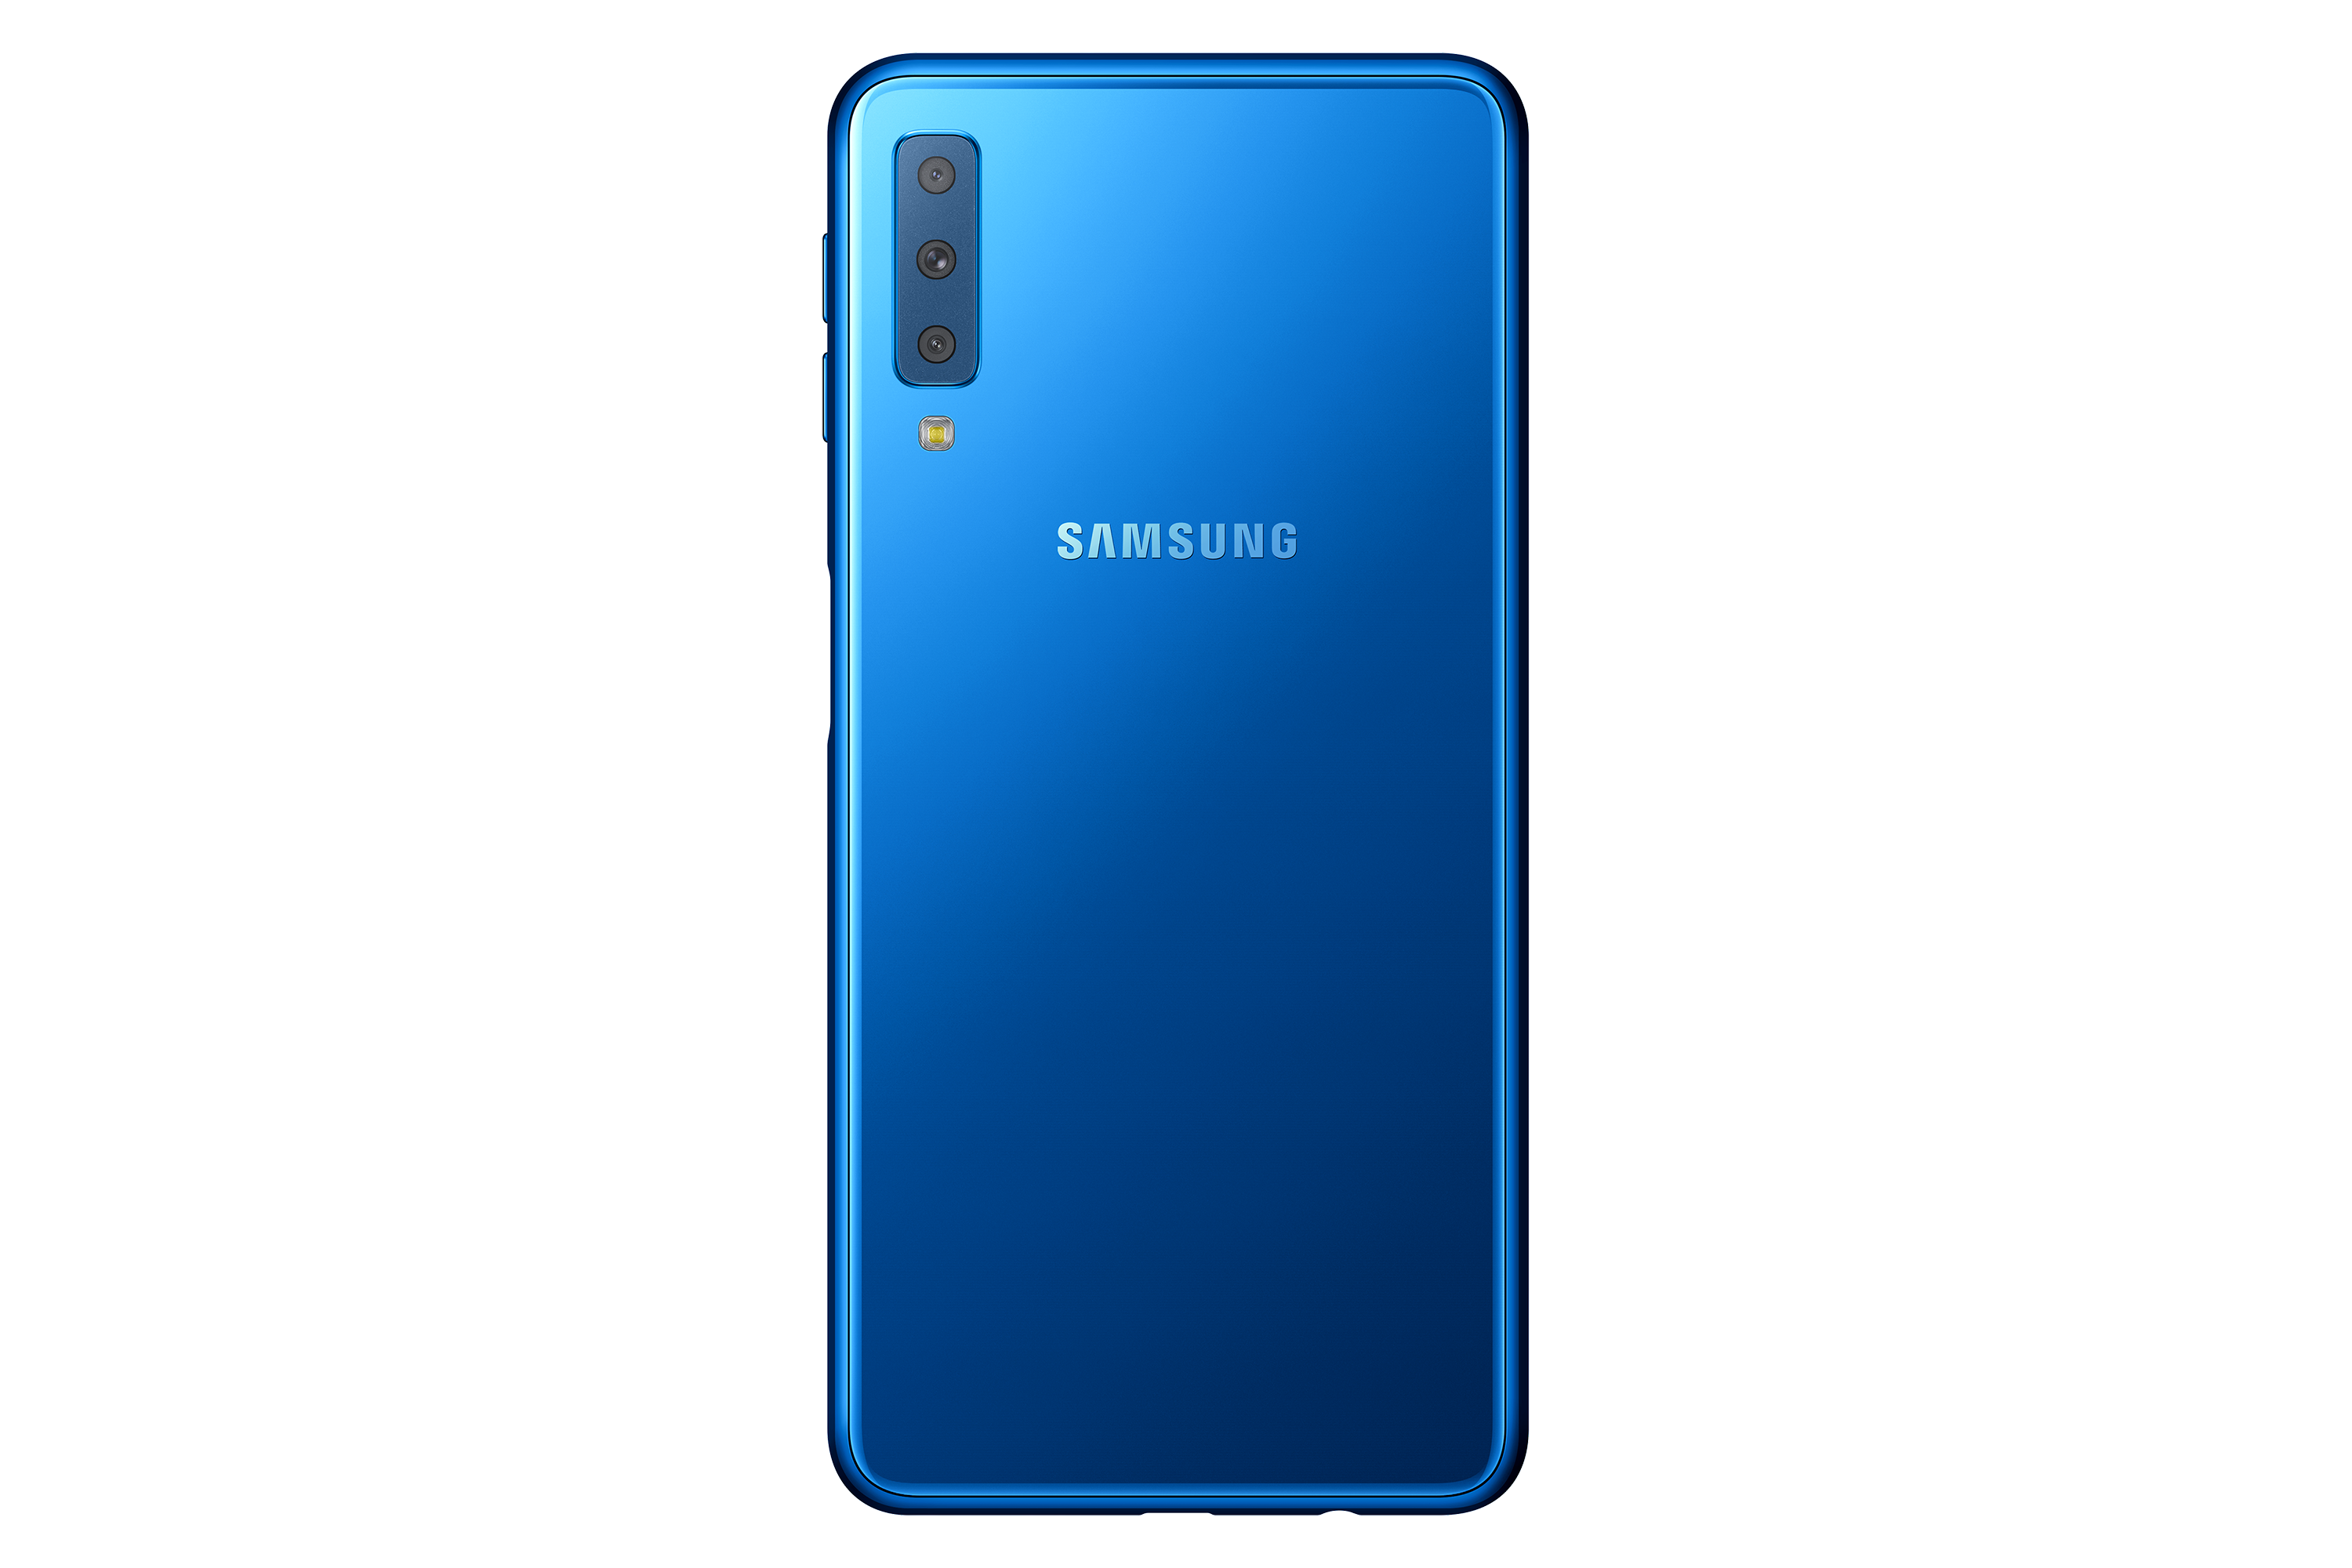 Samsung Galaxy A7 (2017) and Galaxy A8 (2018) are slowly getting their October security patches